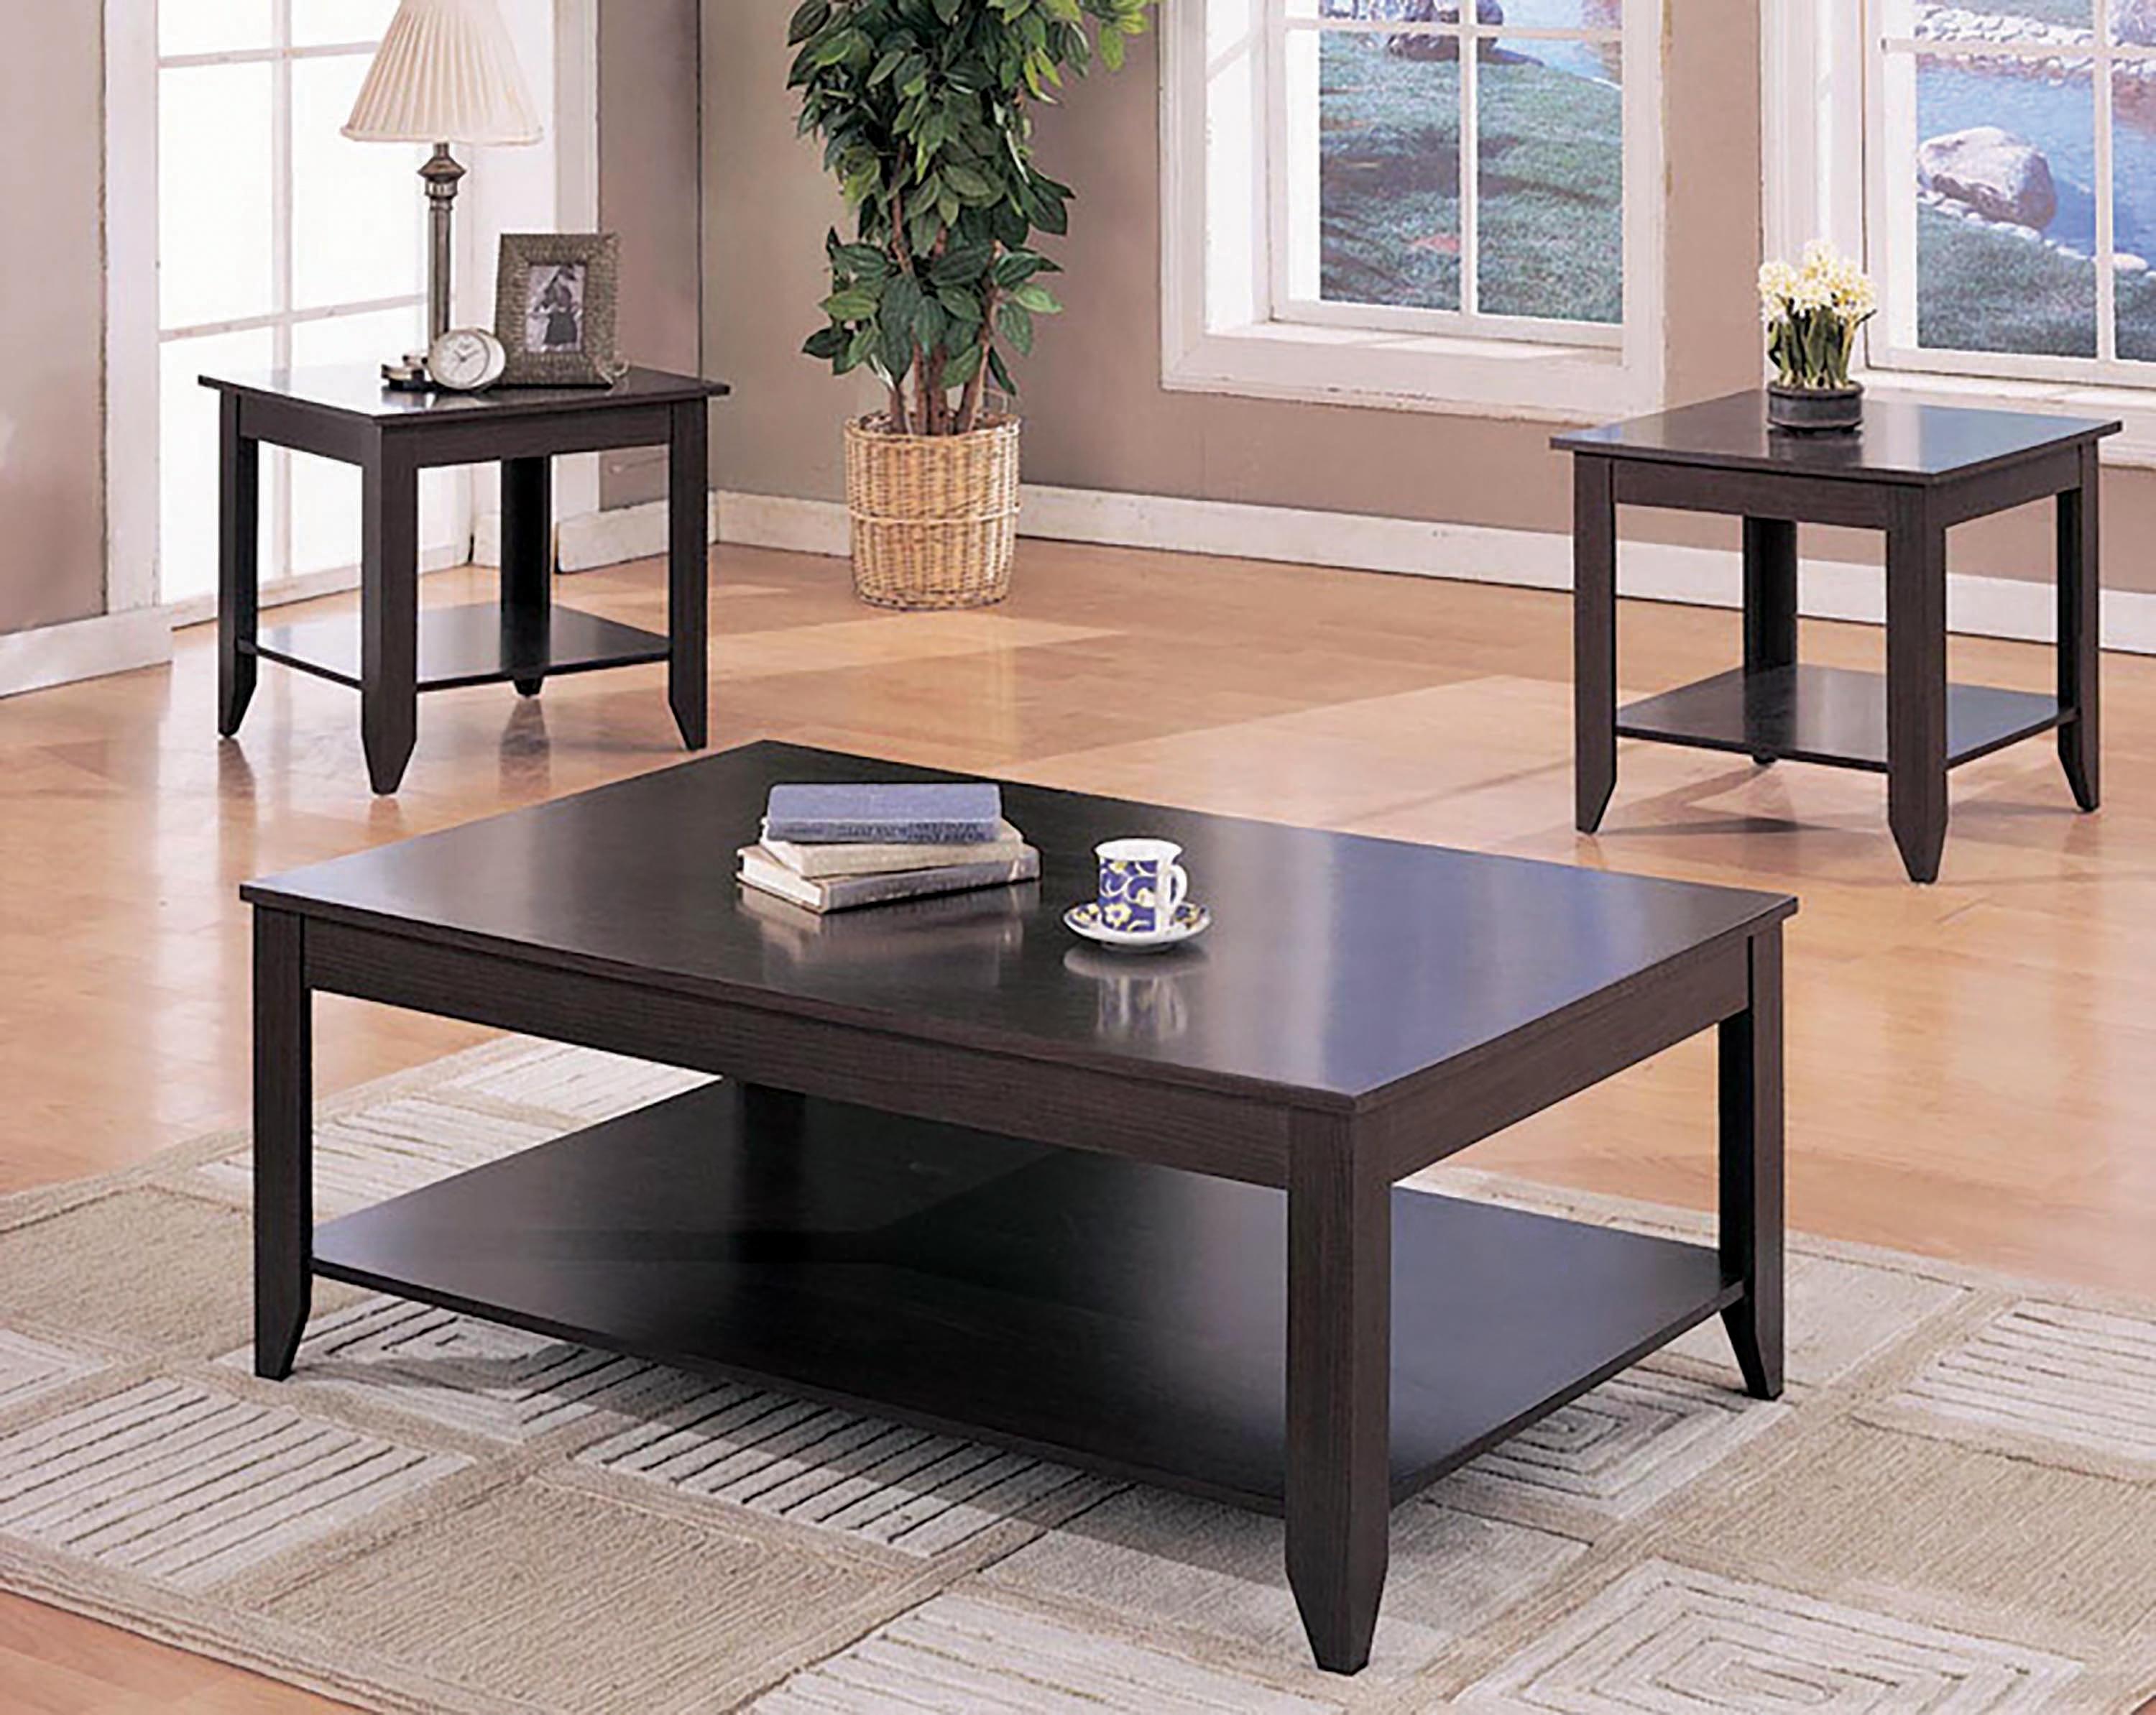 Transitional Coffee Table Set 700285 700285 in Cappuccino 